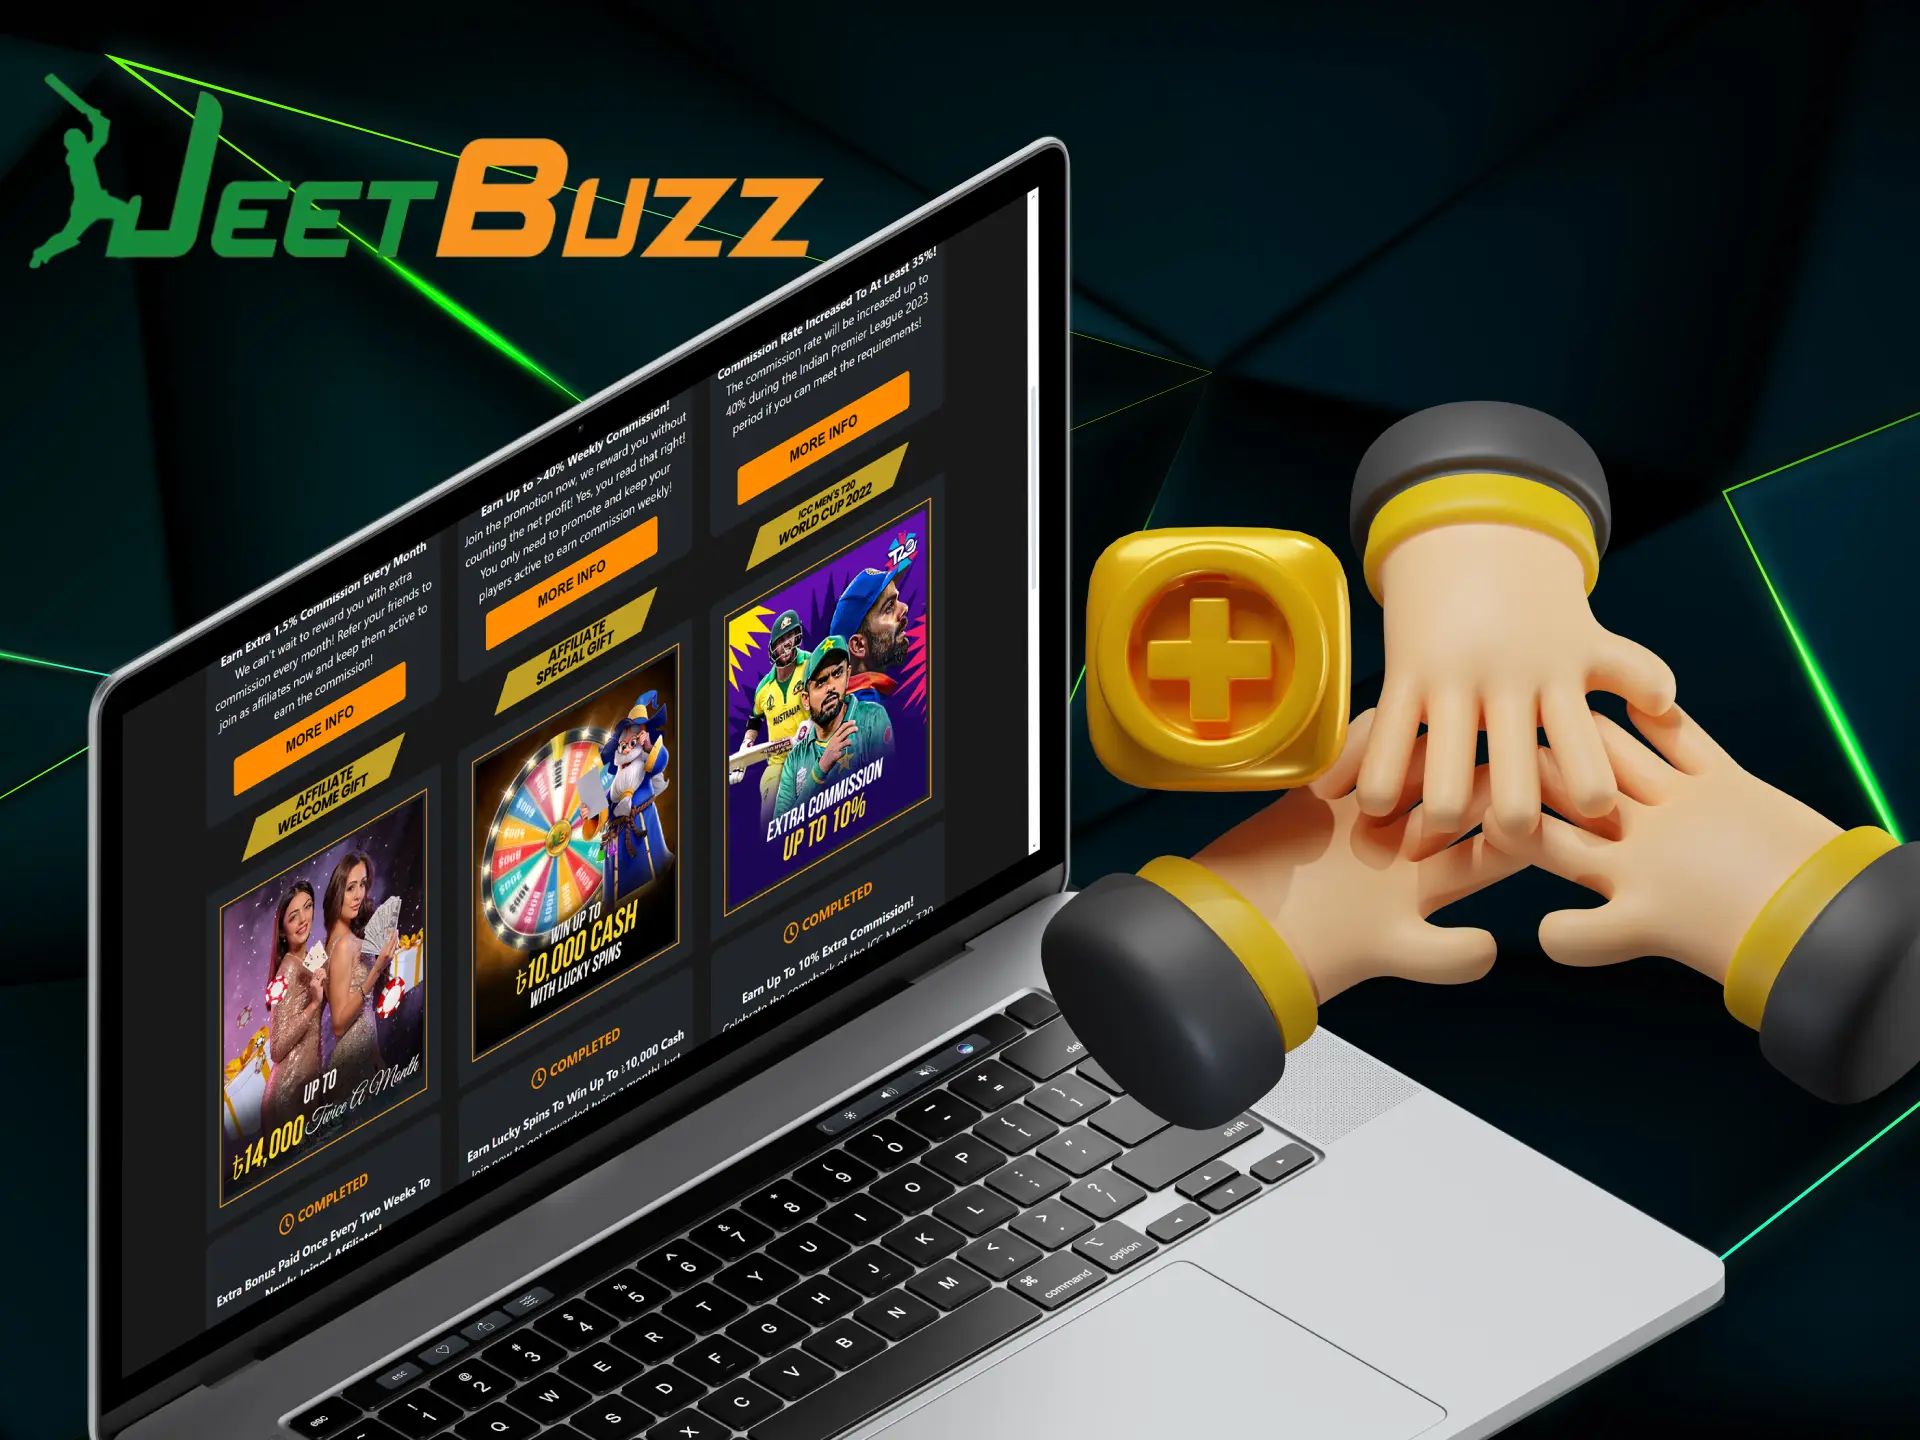 You can earn extra money by inviting new players to the JeetBuzz site.